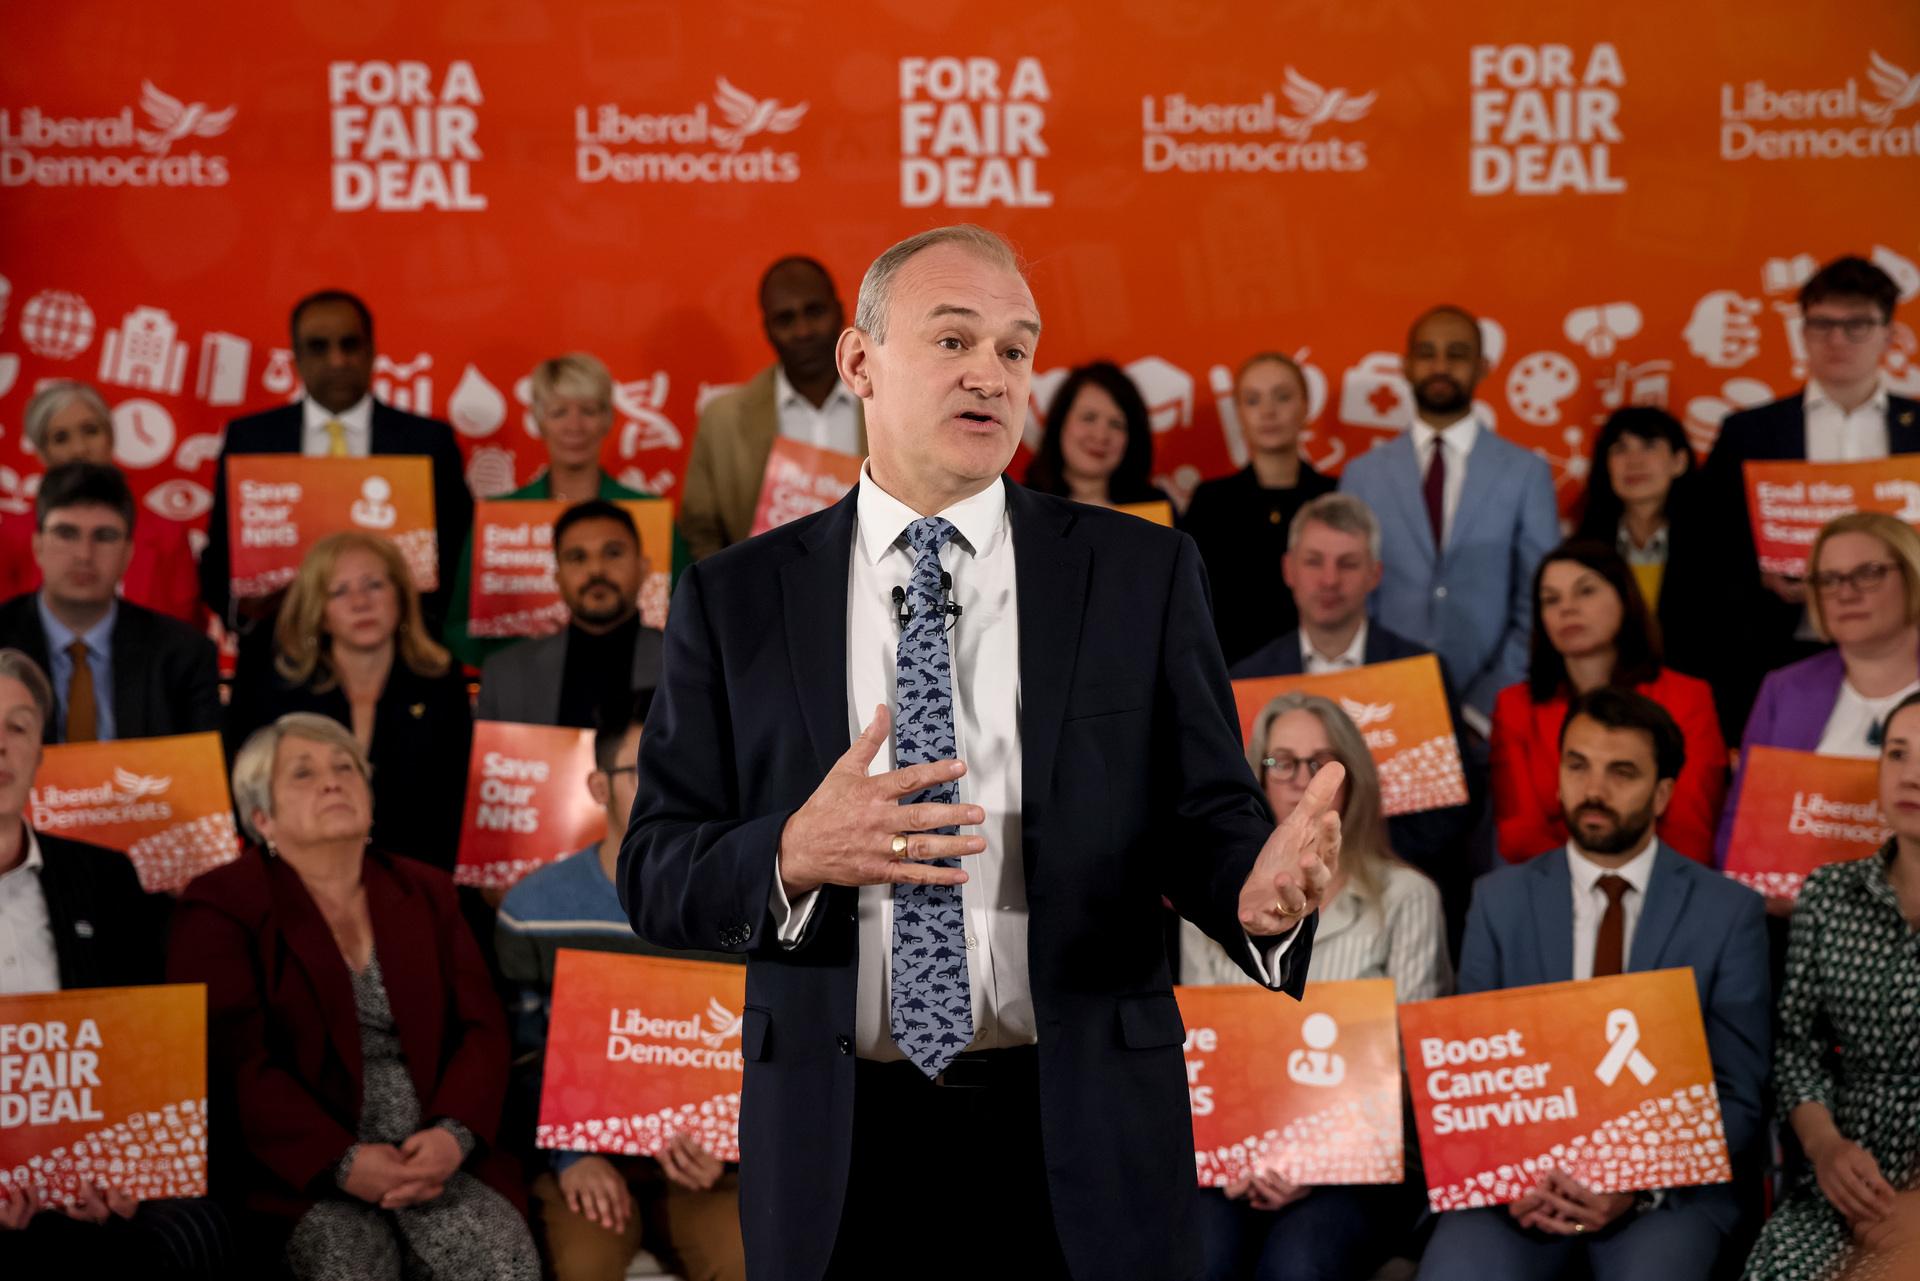 Liberal Democrat leader Ed Davey wants to overtake the SNP as the third largest party in the House of Commons.